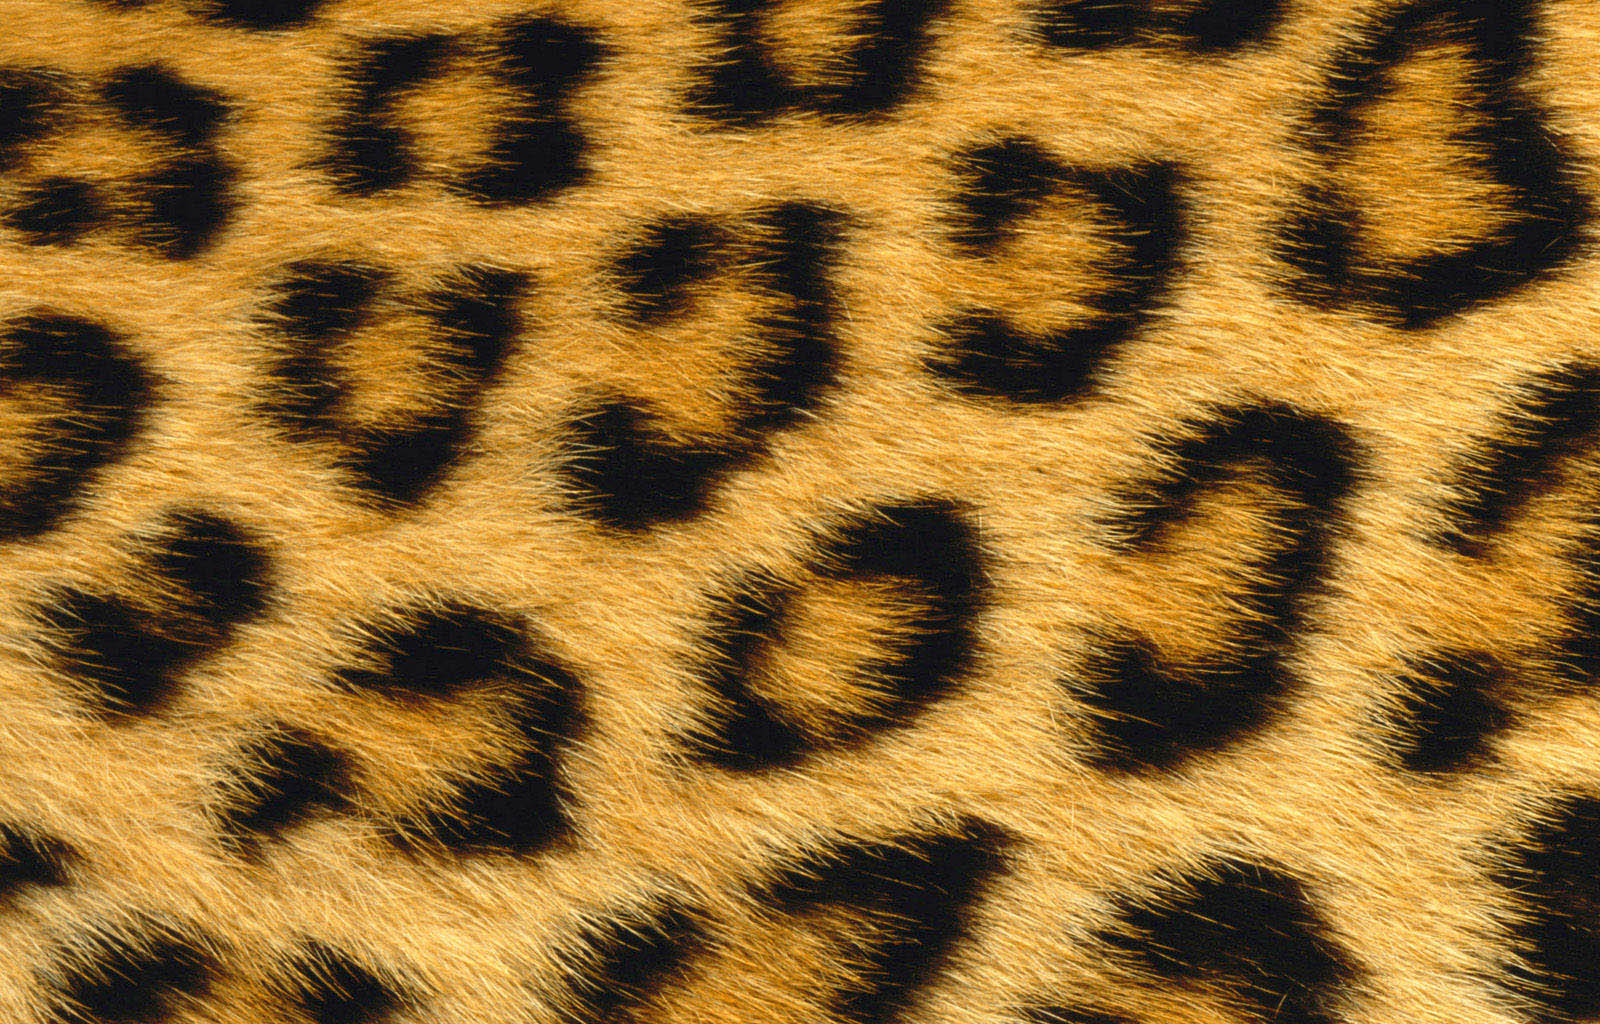 Abstract Cool Desktop Pictures Leopard Wallpaper Full HD